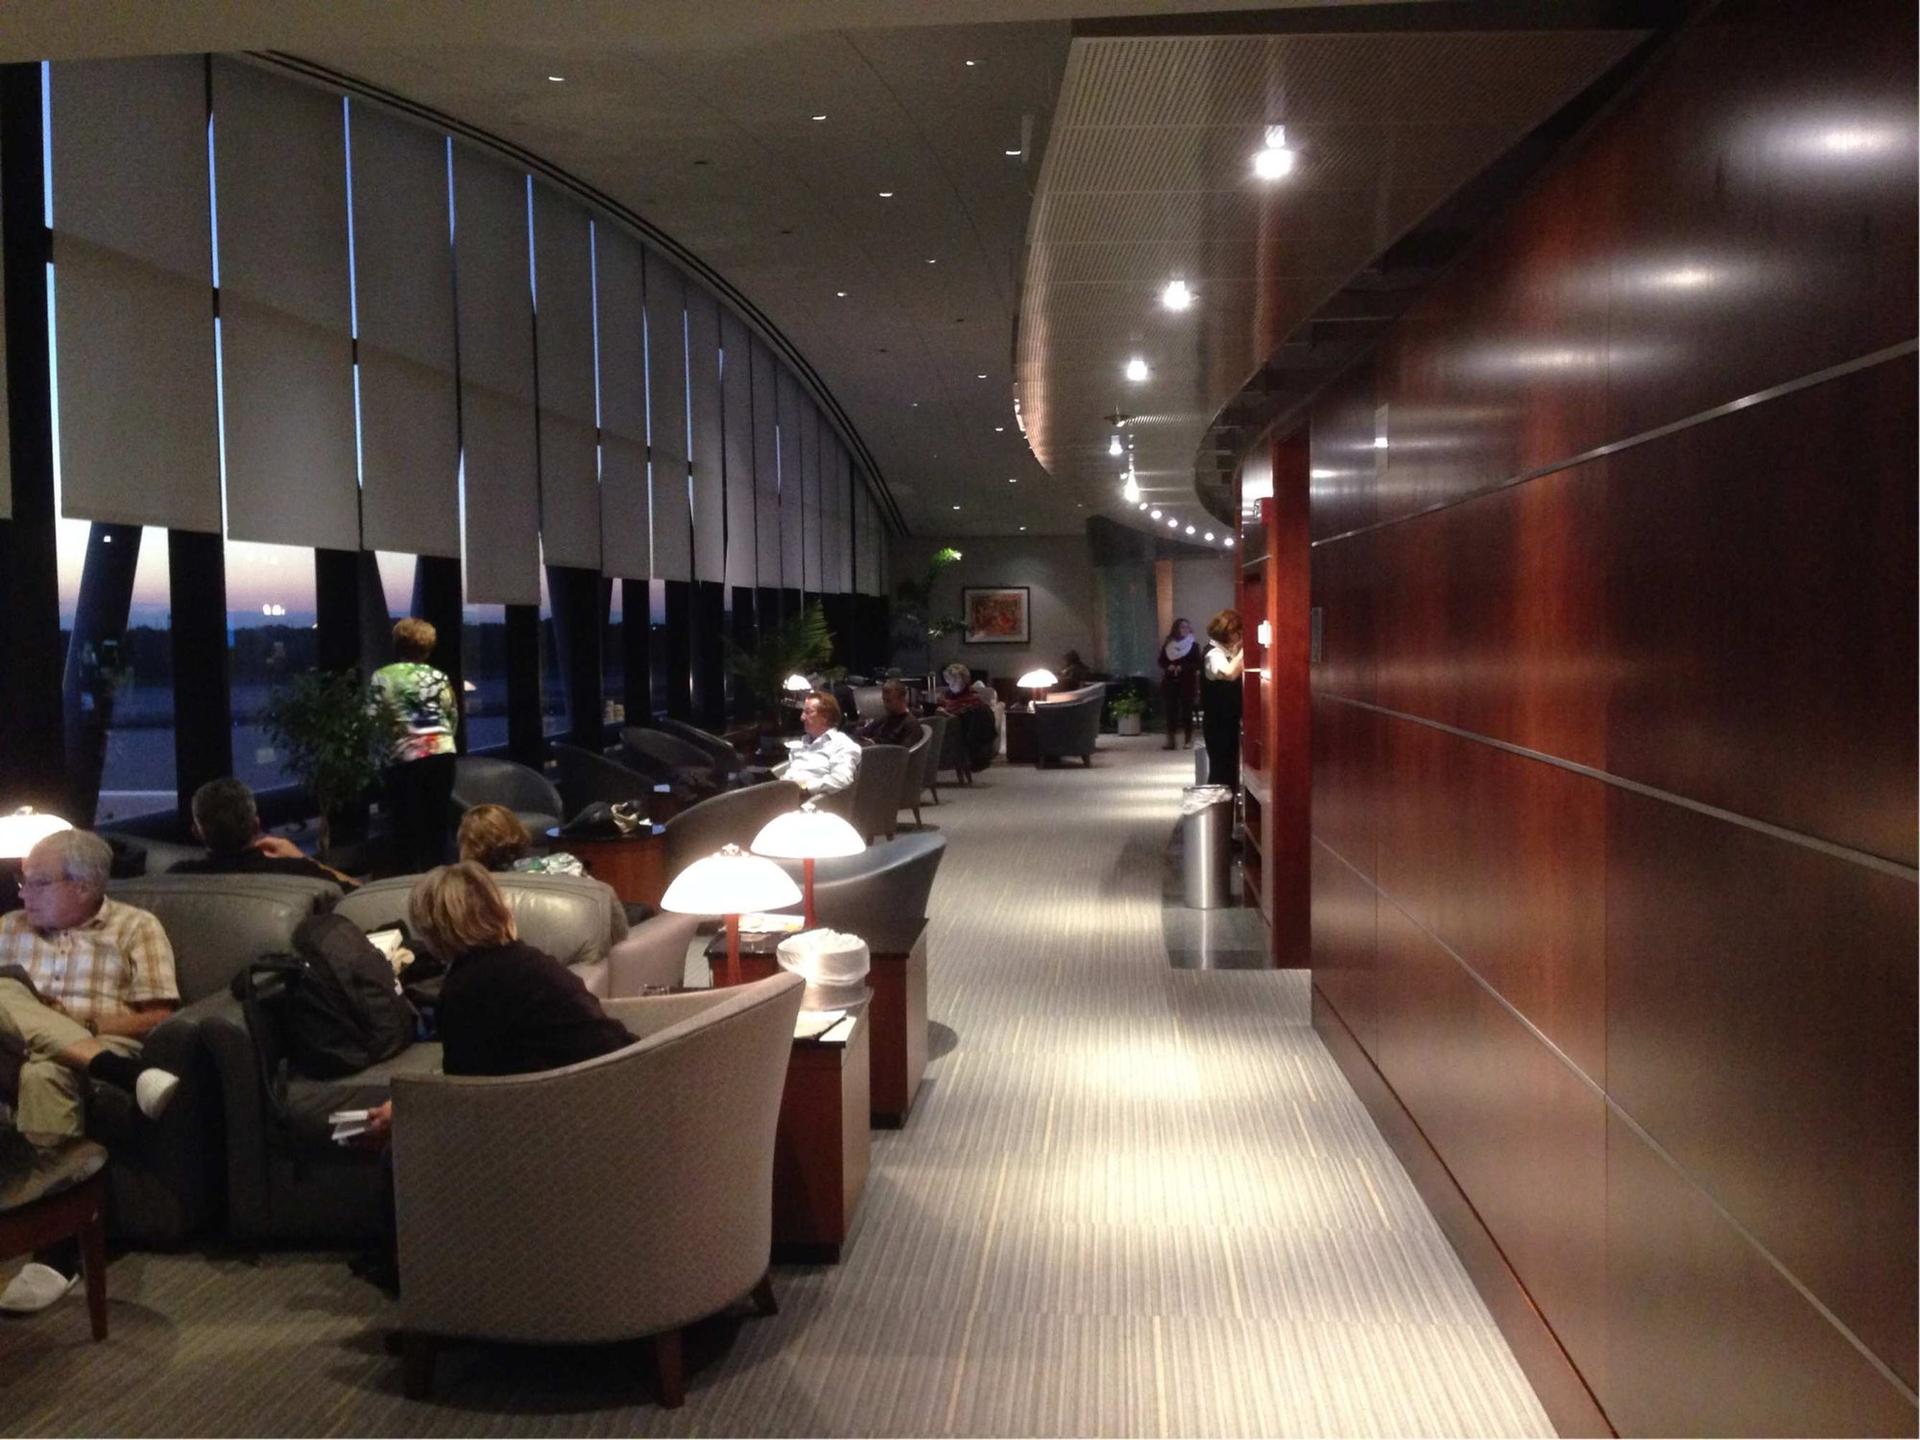 American Airlines Admirals Club image 6 of 20